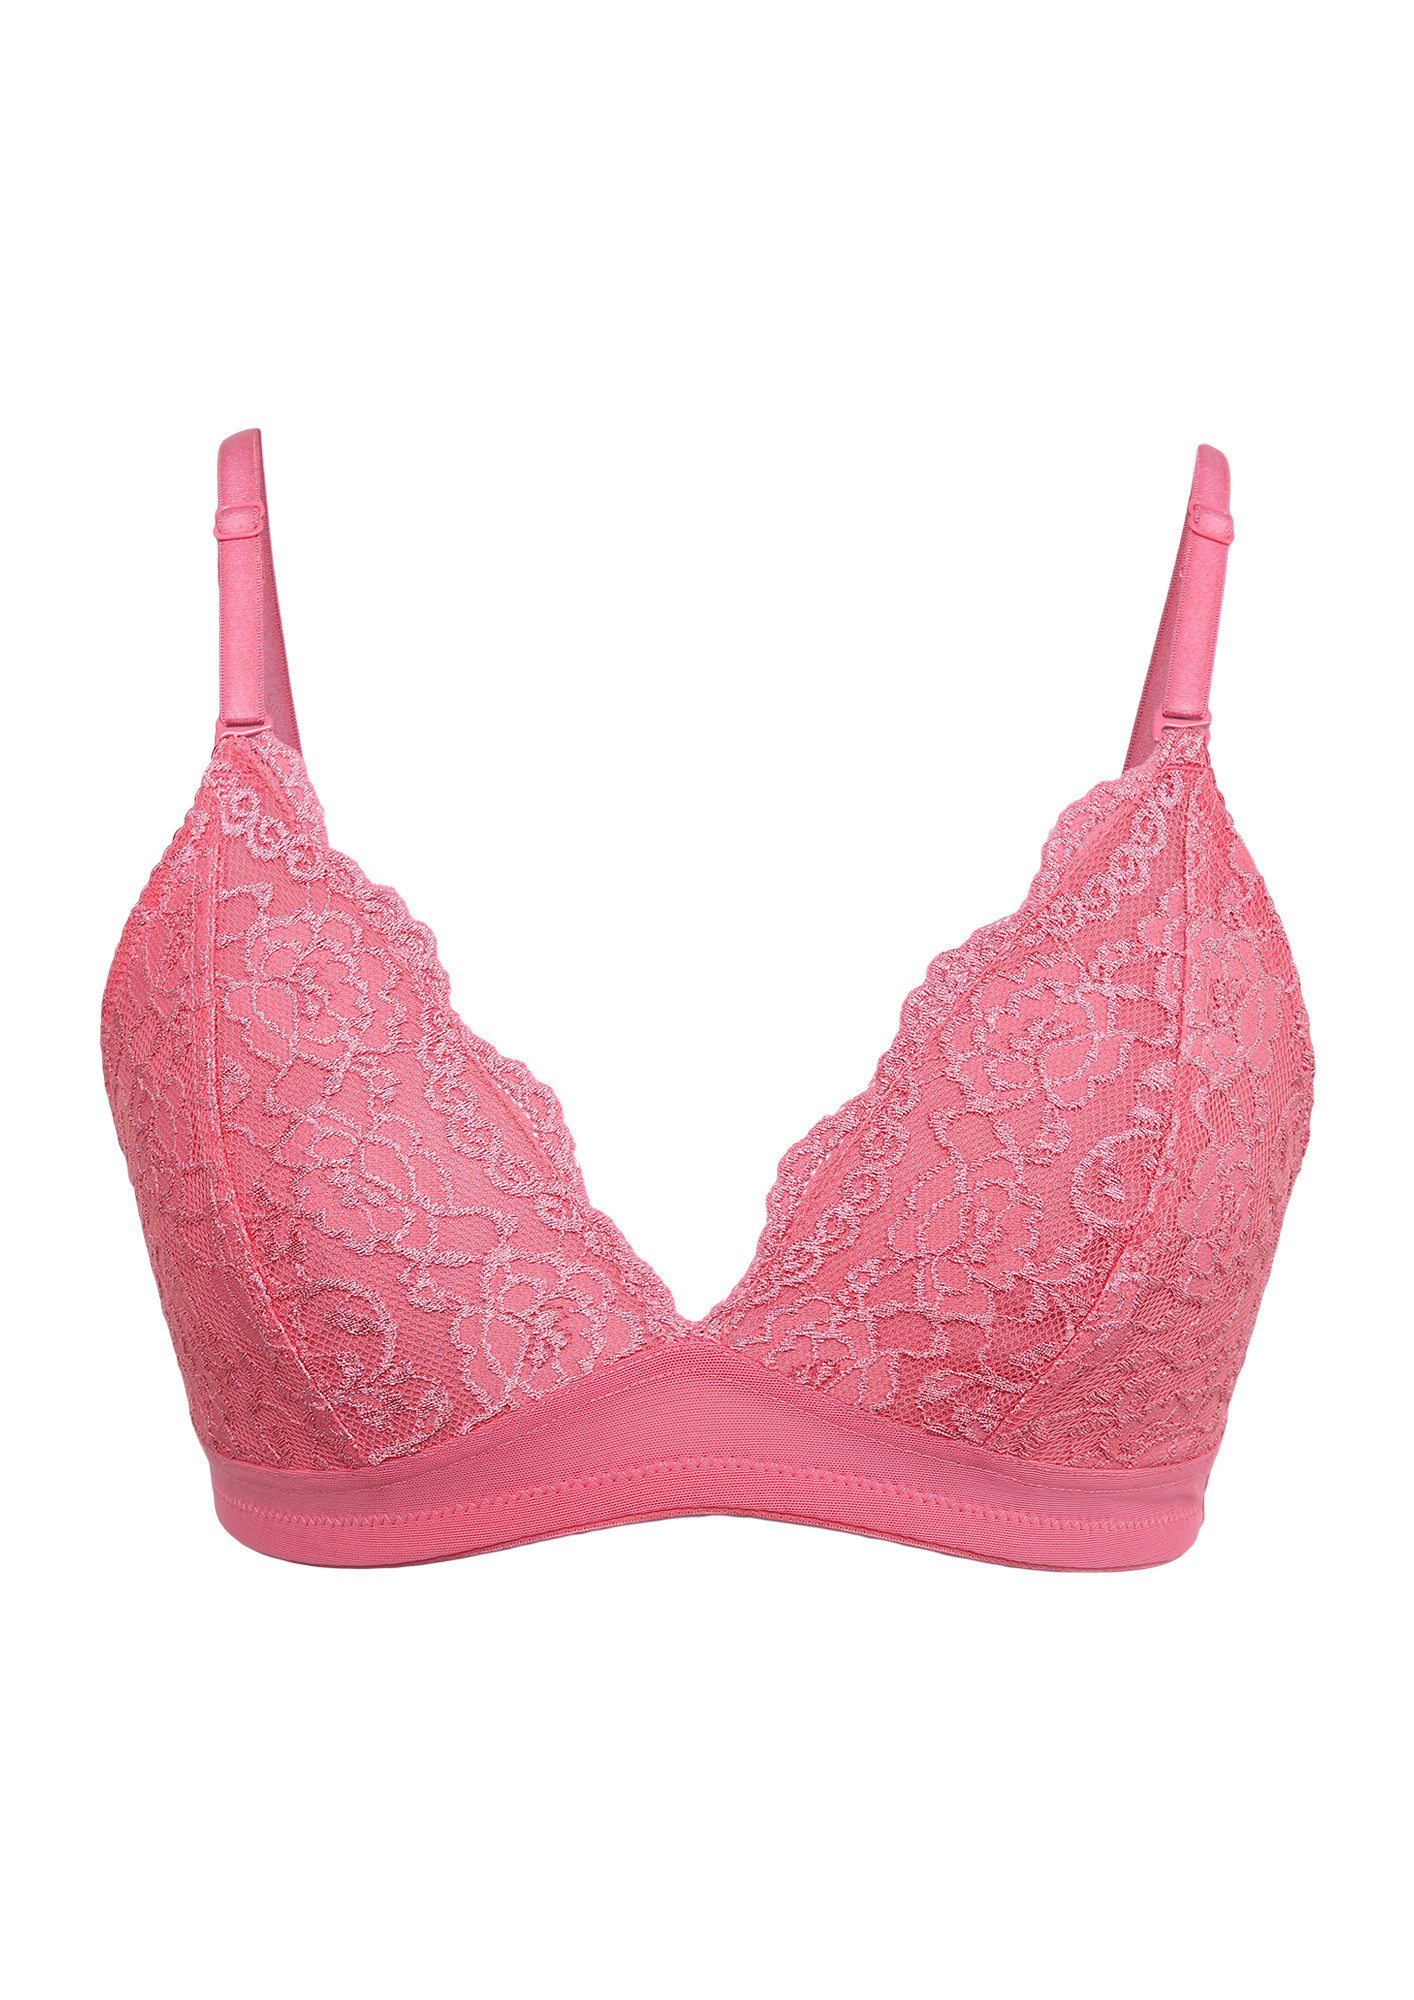 LACE NON-PADDED NON-WIRED FULL COVERAGE PINK BRA